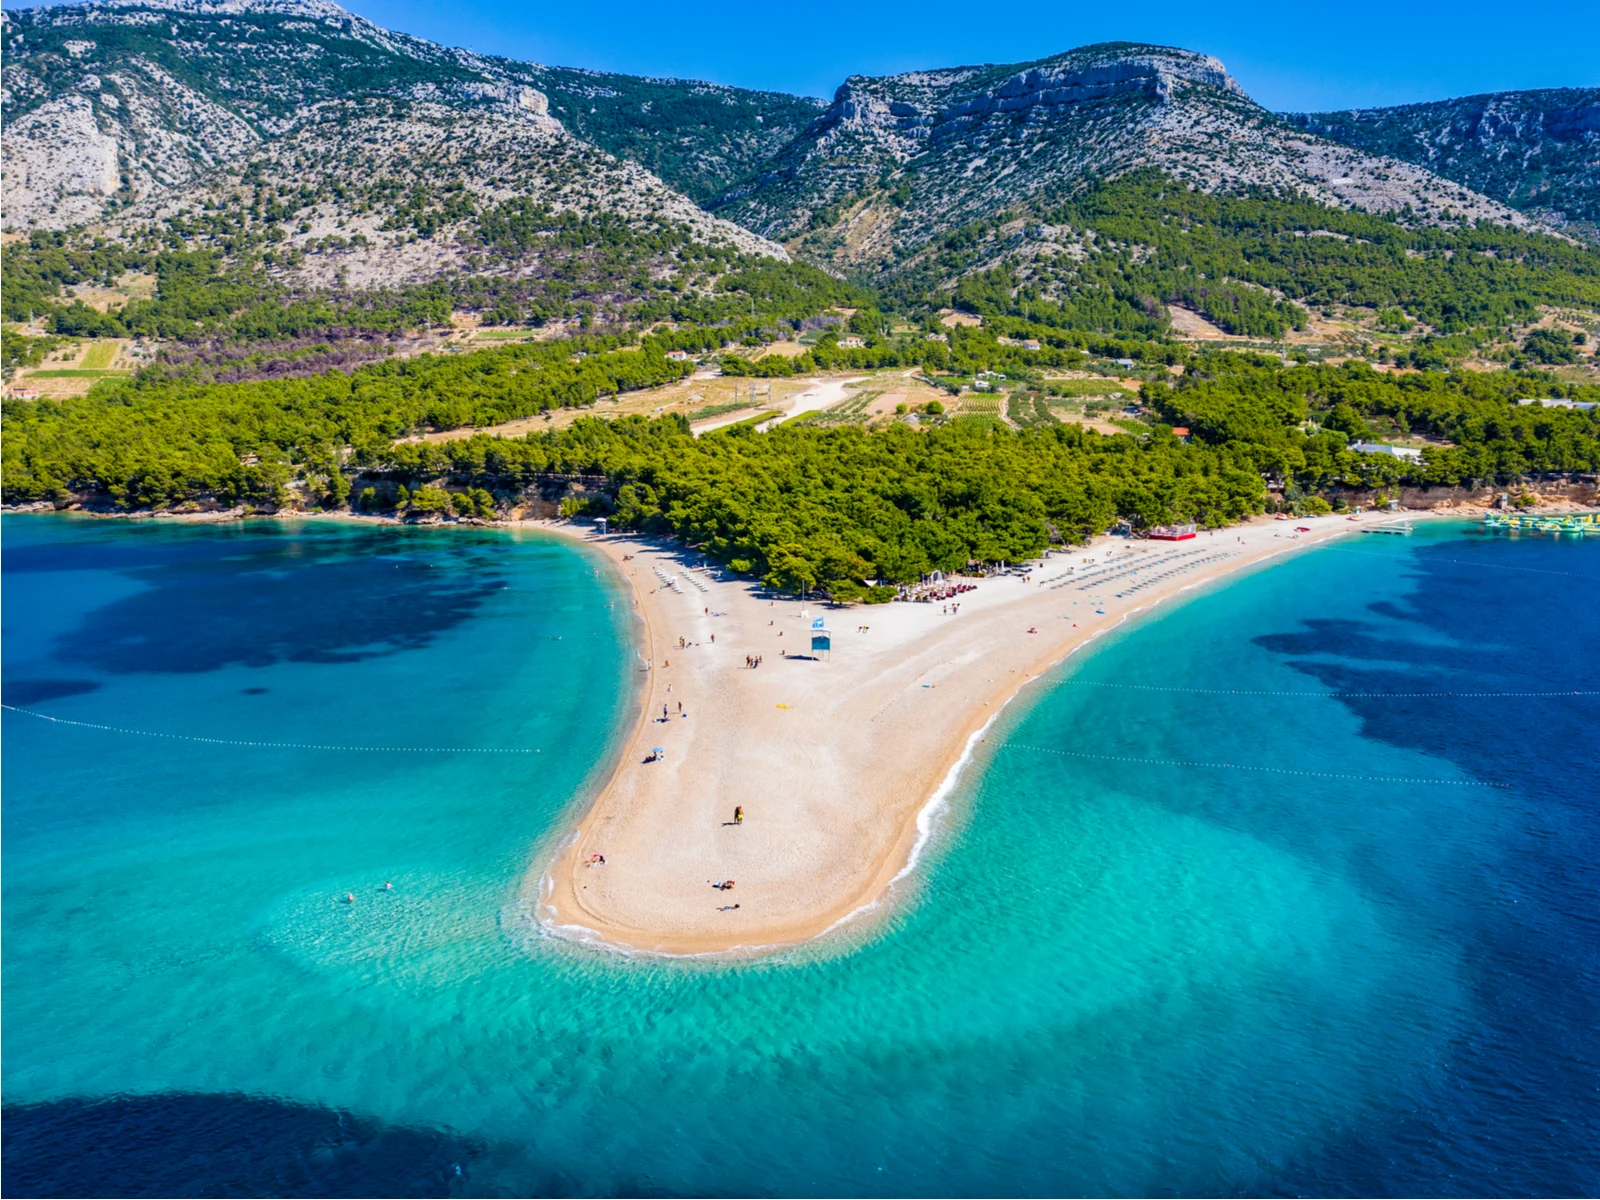 Zlatni Rat Beach, one of our top picks for things to do in Croatia, pictured from the air with the mountains in the background